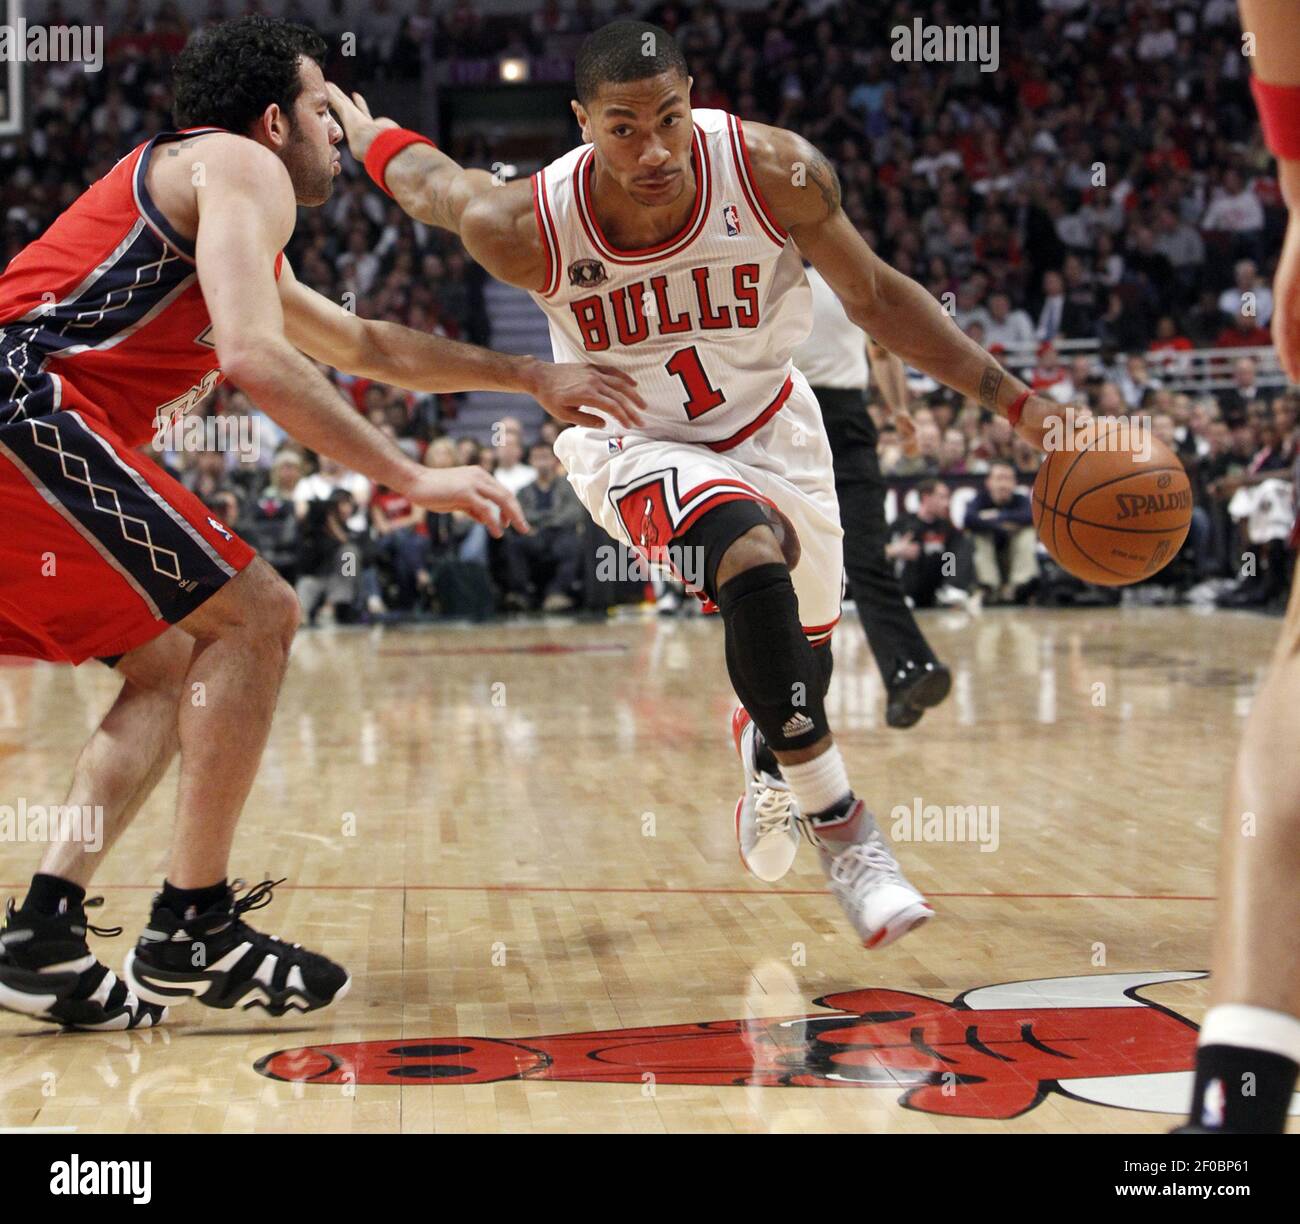 Chicago Bulls point guard Derrick Rose (1) drives around New Jersey Nets  point guard Jordan Farmar (2) during the first half of their game at the  United Center in Chicago, Illinois, on